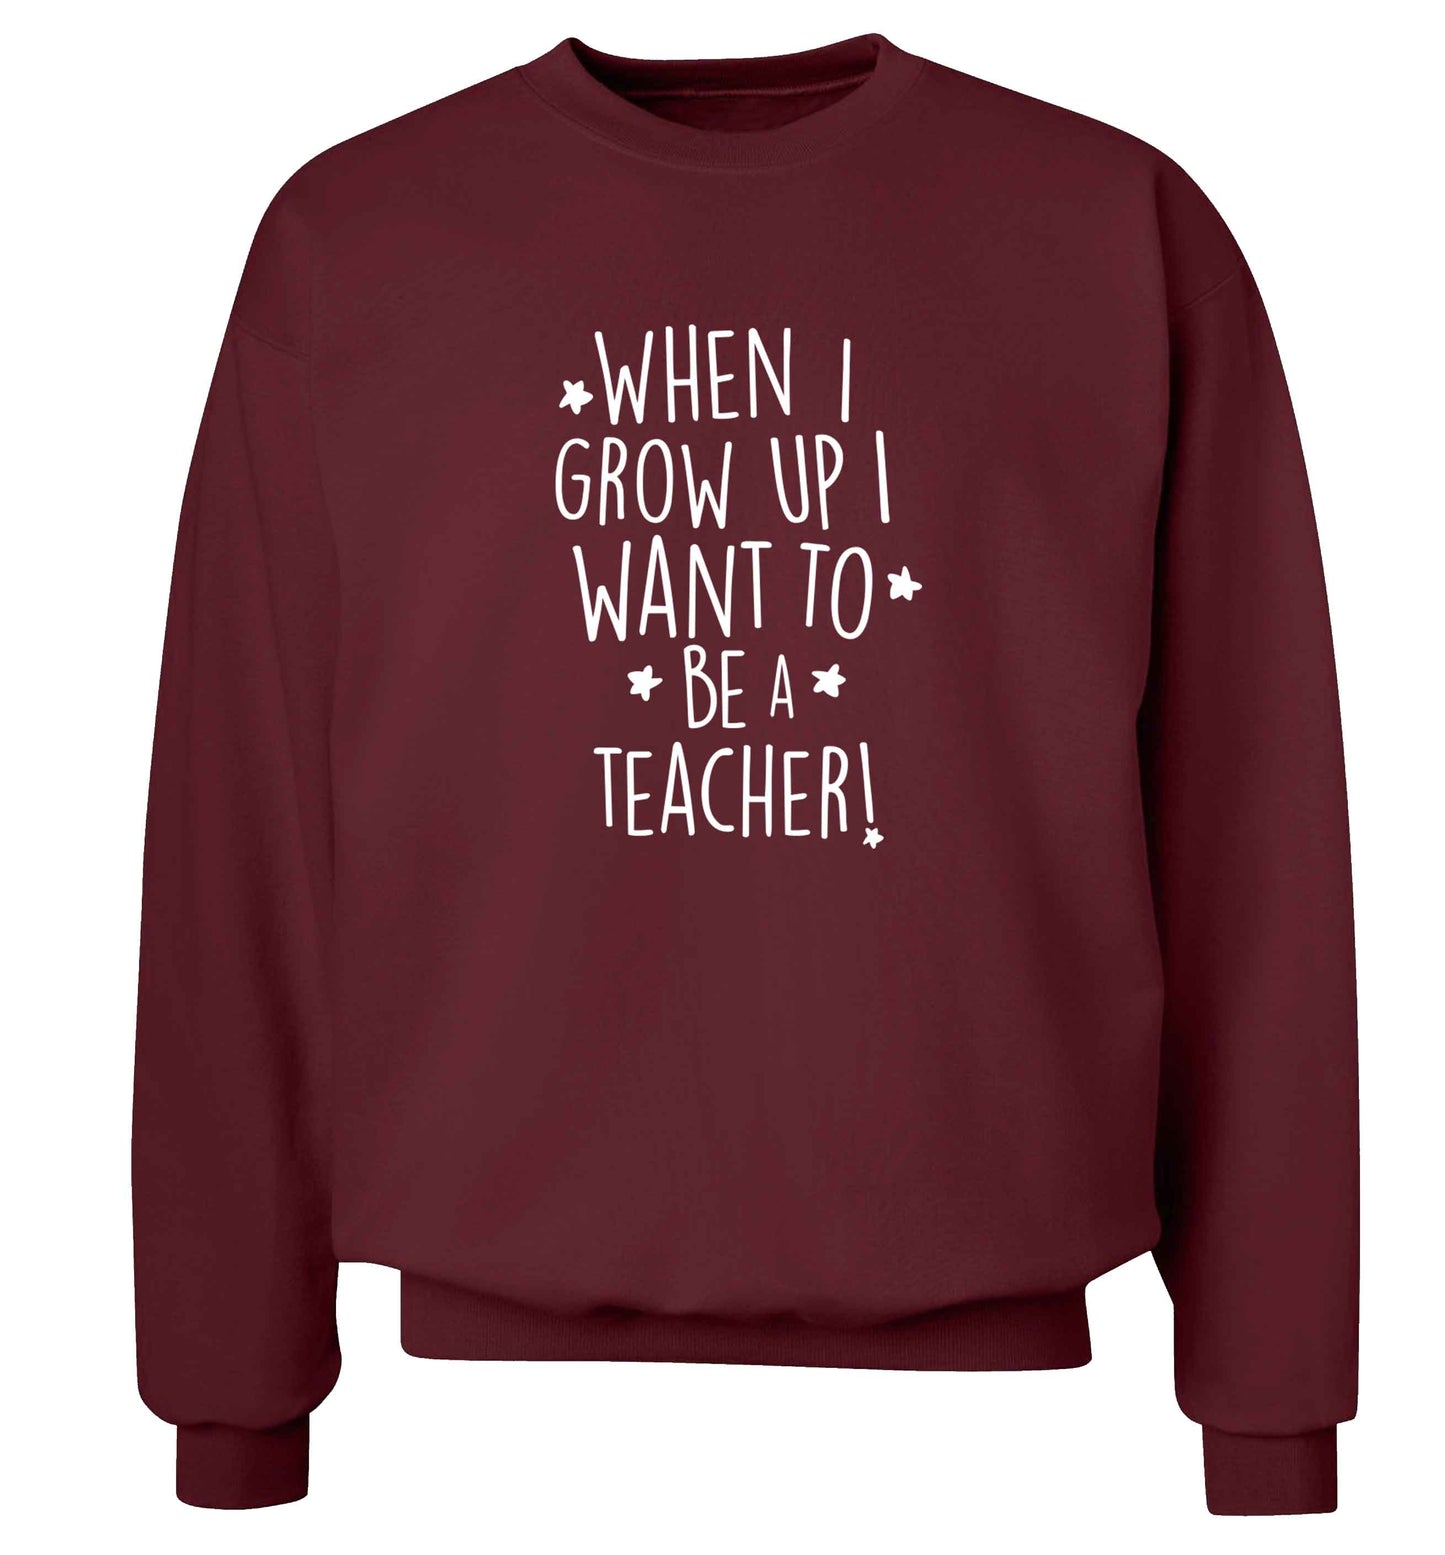 When I grow up I want to be a teacher adult's unisex maroon sweater 2XL